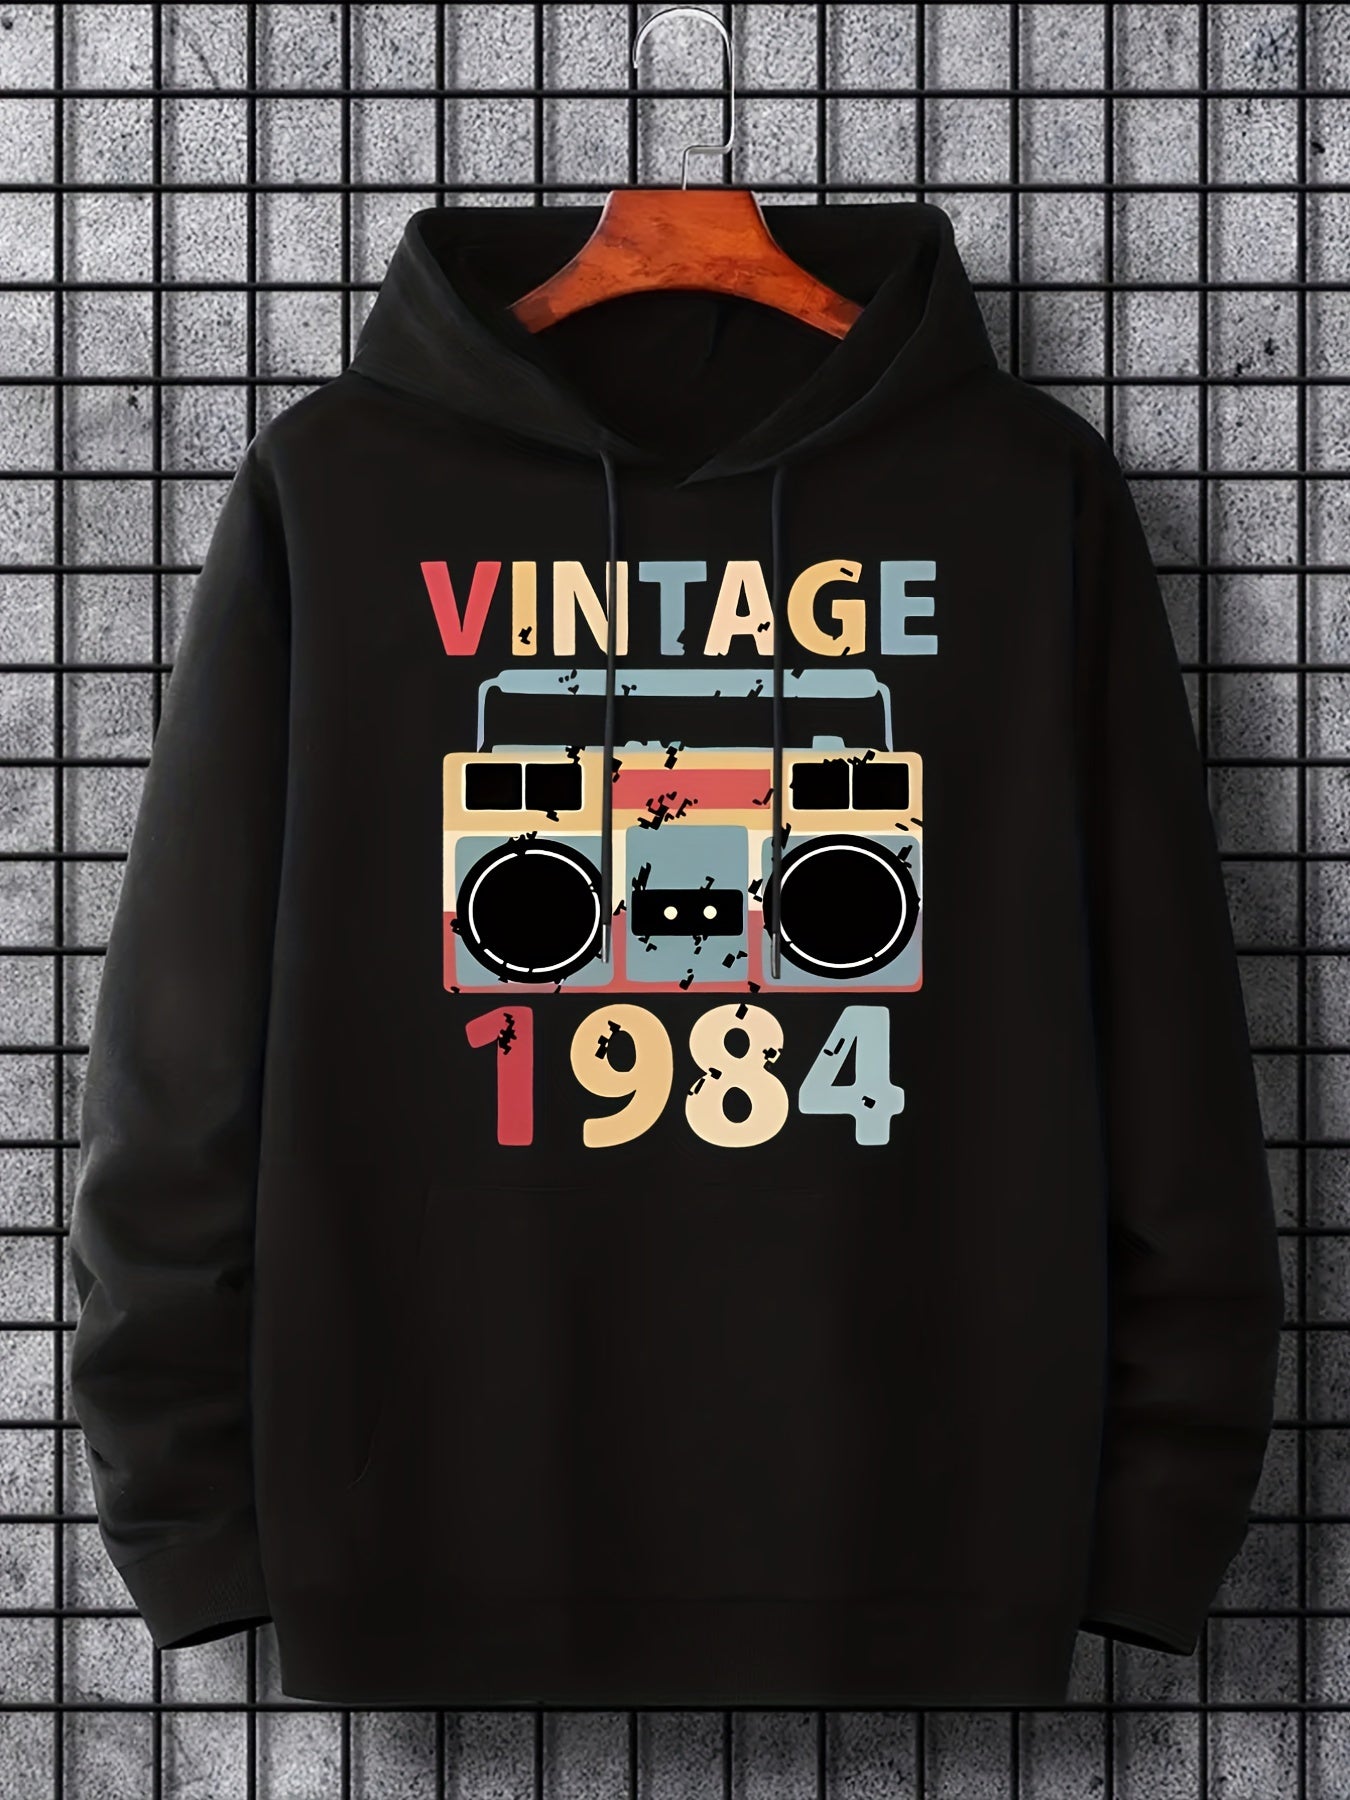 Hoodies For Men, 'Vintage' Retro Stereo Print Hoodie, Men's Casual Pullover Hooded Sweatshirt With Kangaroo Pocket For Spring Fall, As Gifts